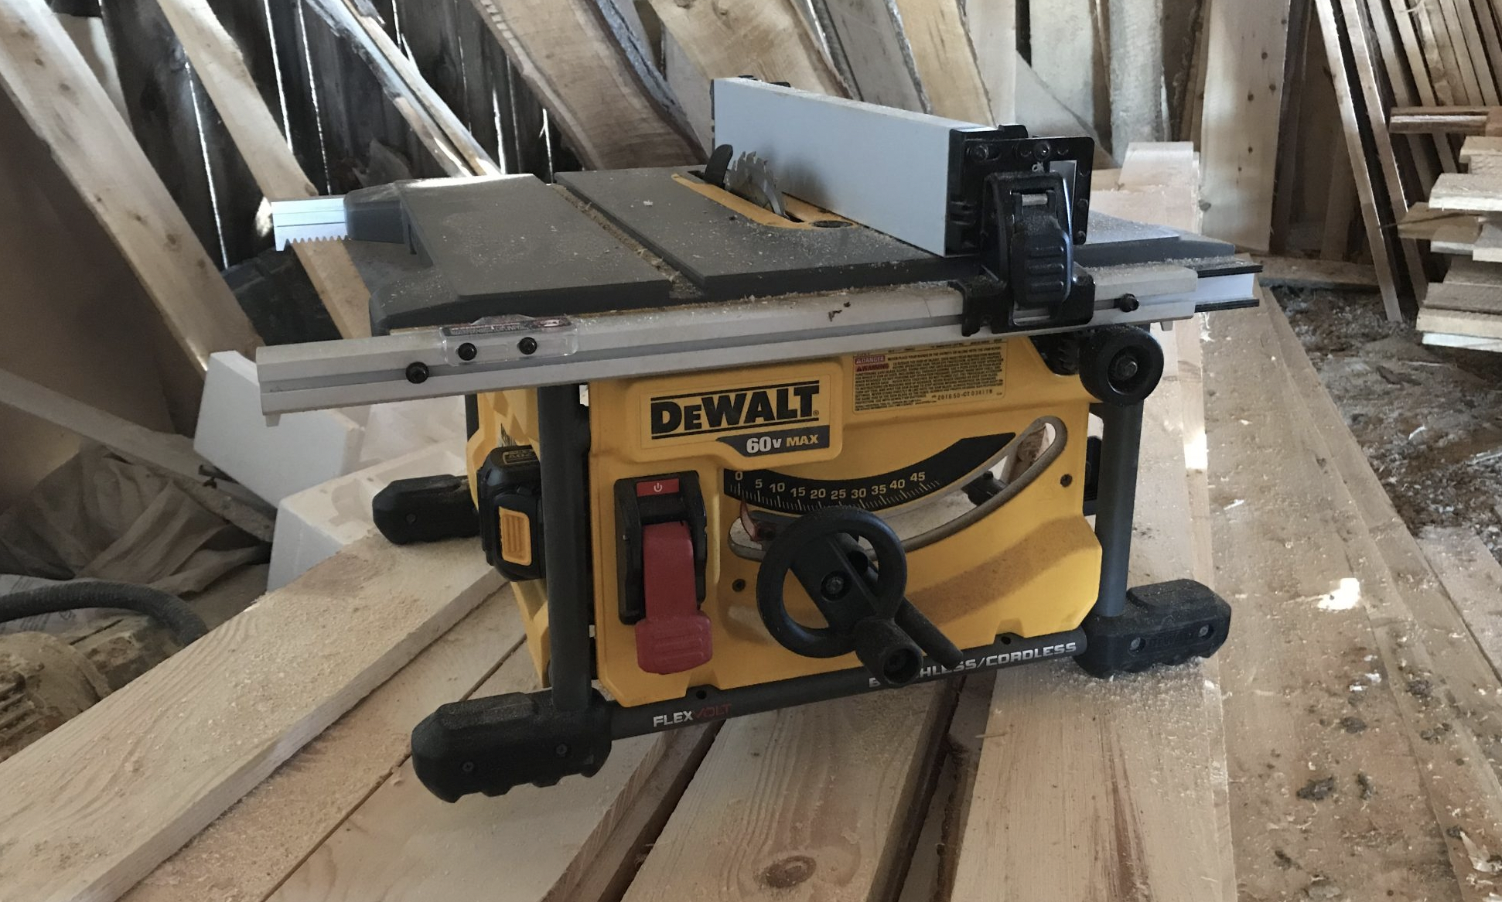 Battery powered table saw.